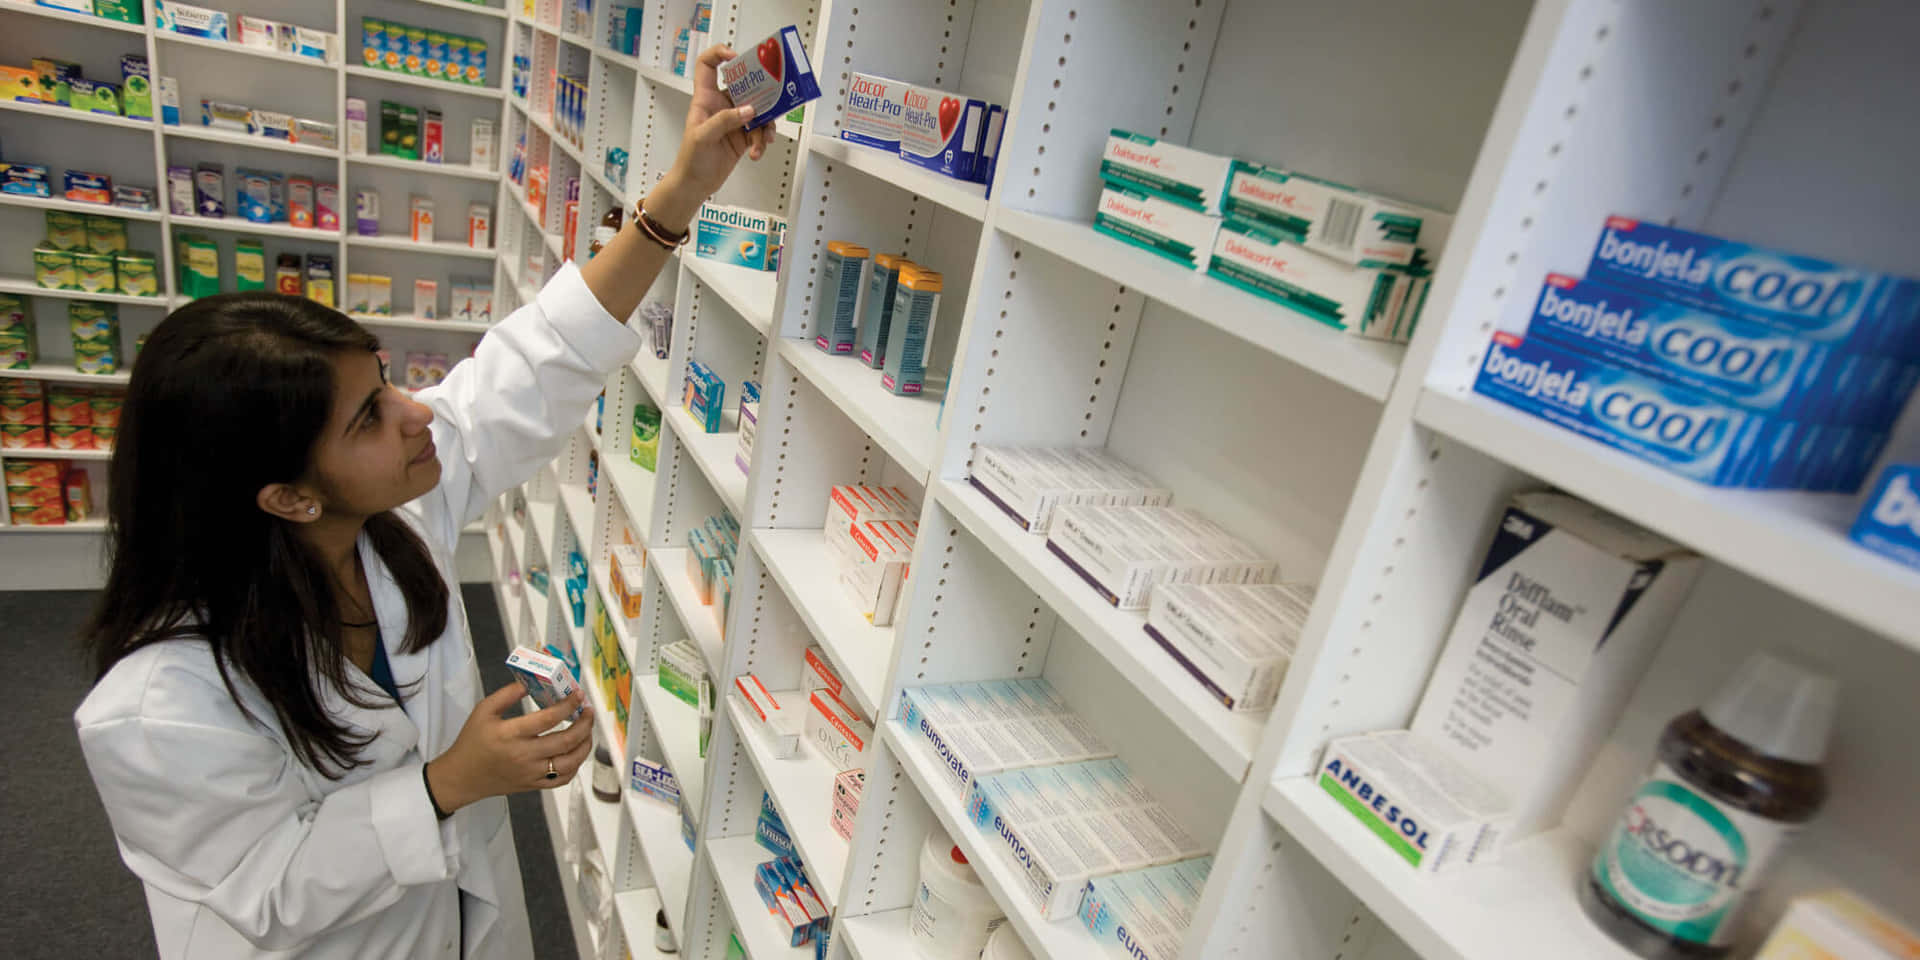 A Woman In A White Coat Is Looking At Shelves Of Medicine